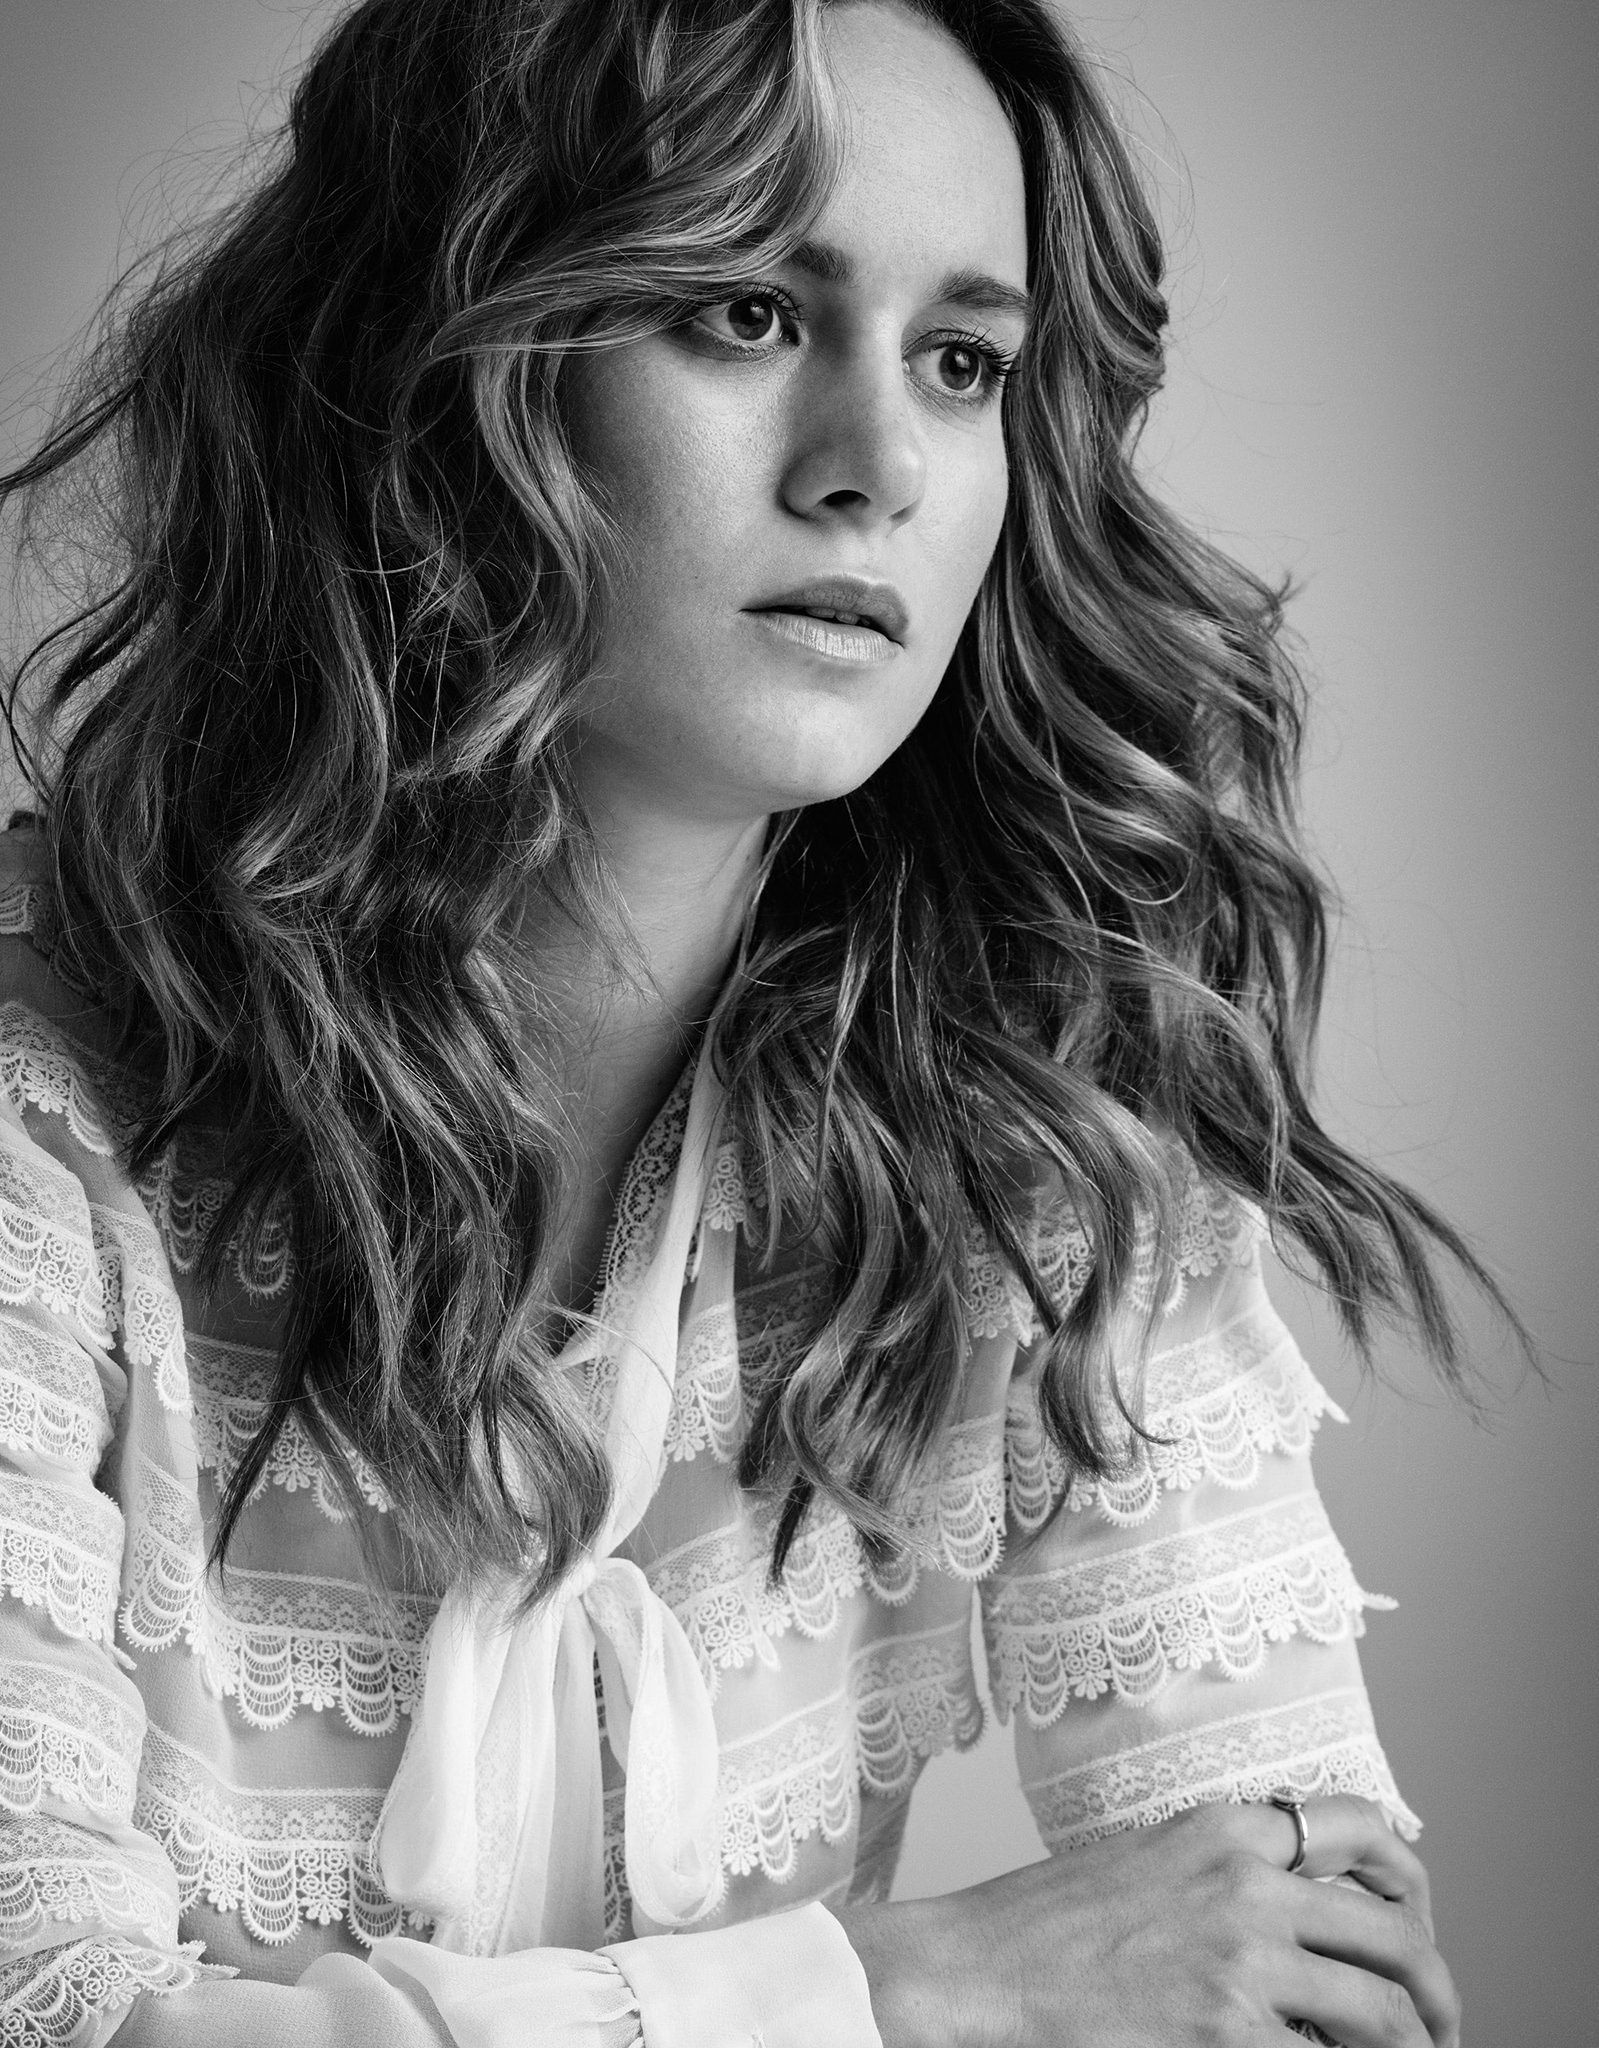 Brie Larson Actress Women Monochrome Looking Into The Distance Thinking 1599x2048